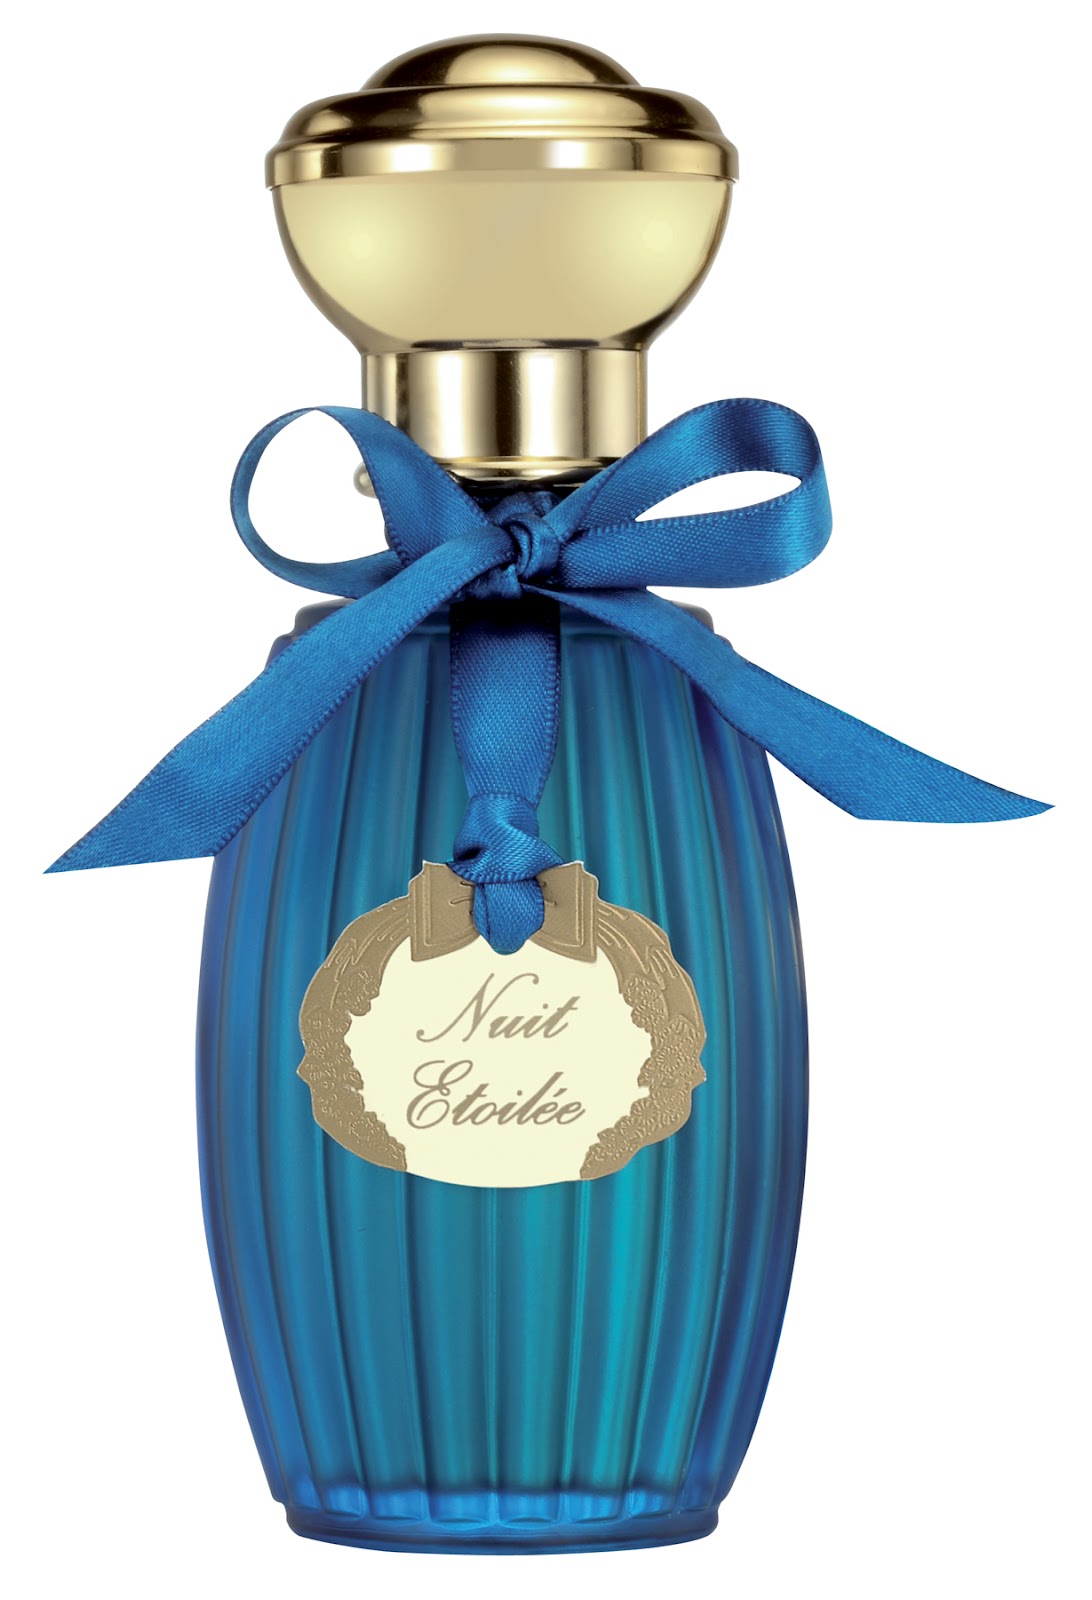 For The Love Of Perfume: The Divine Comfort of Annick Goutal Nuit Etoilée